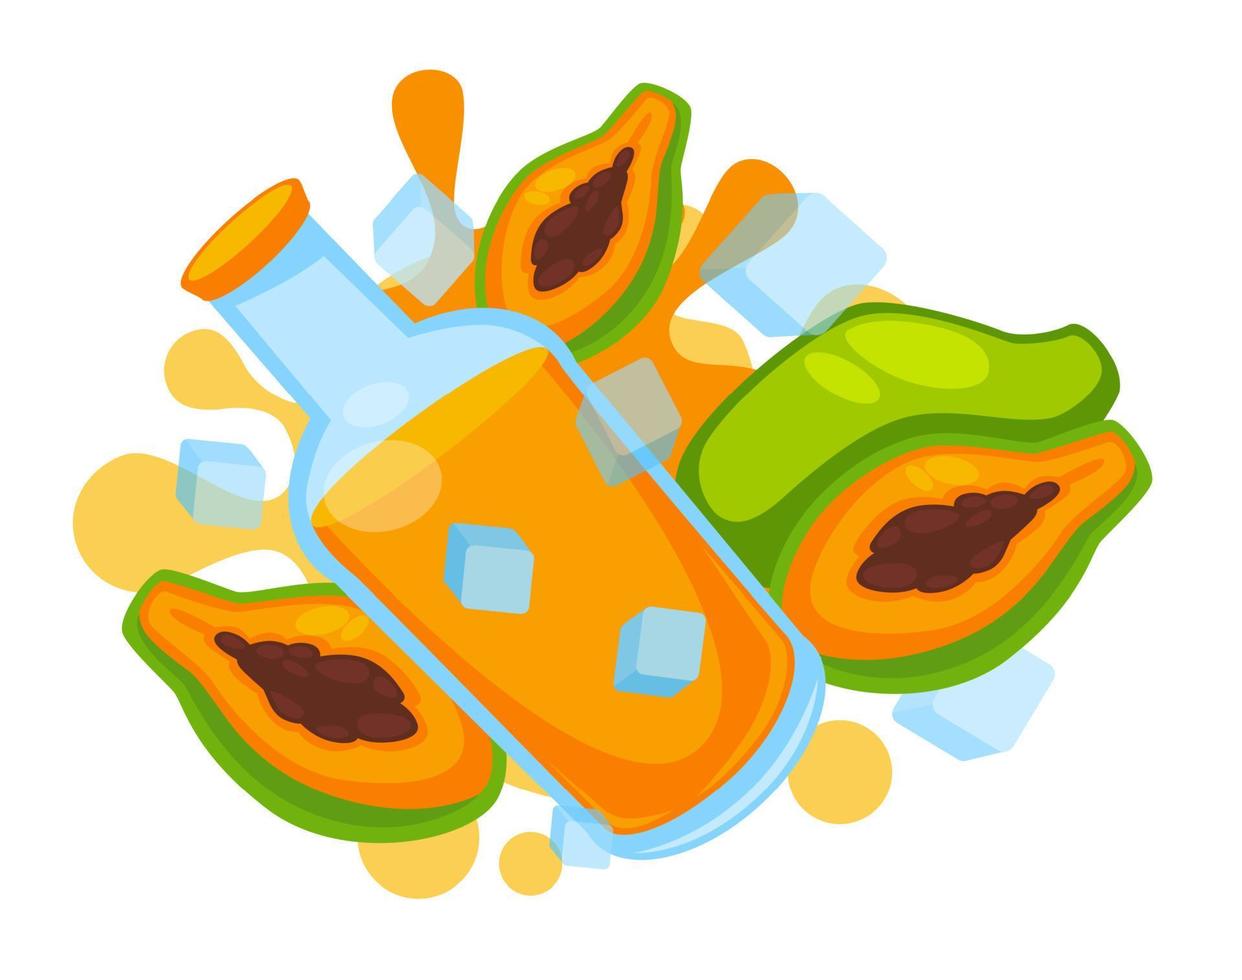 Papaya juice, cocktail in bottle with ice cubes vector